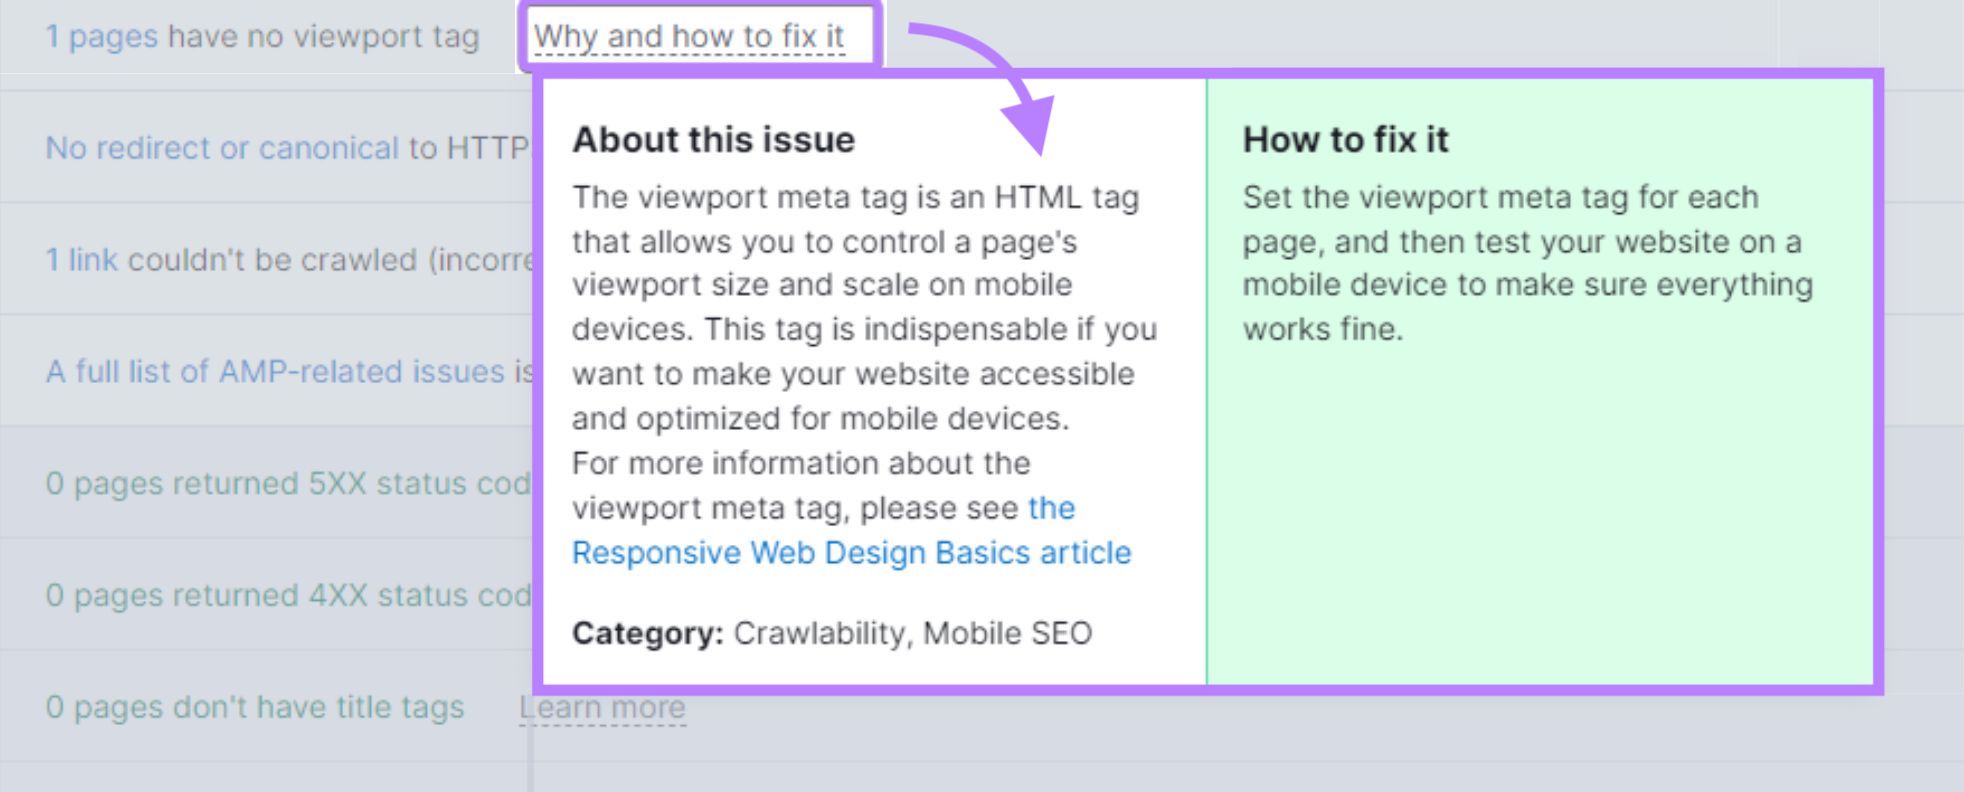 “Why and how to fix it” pop-up window in Site Audit